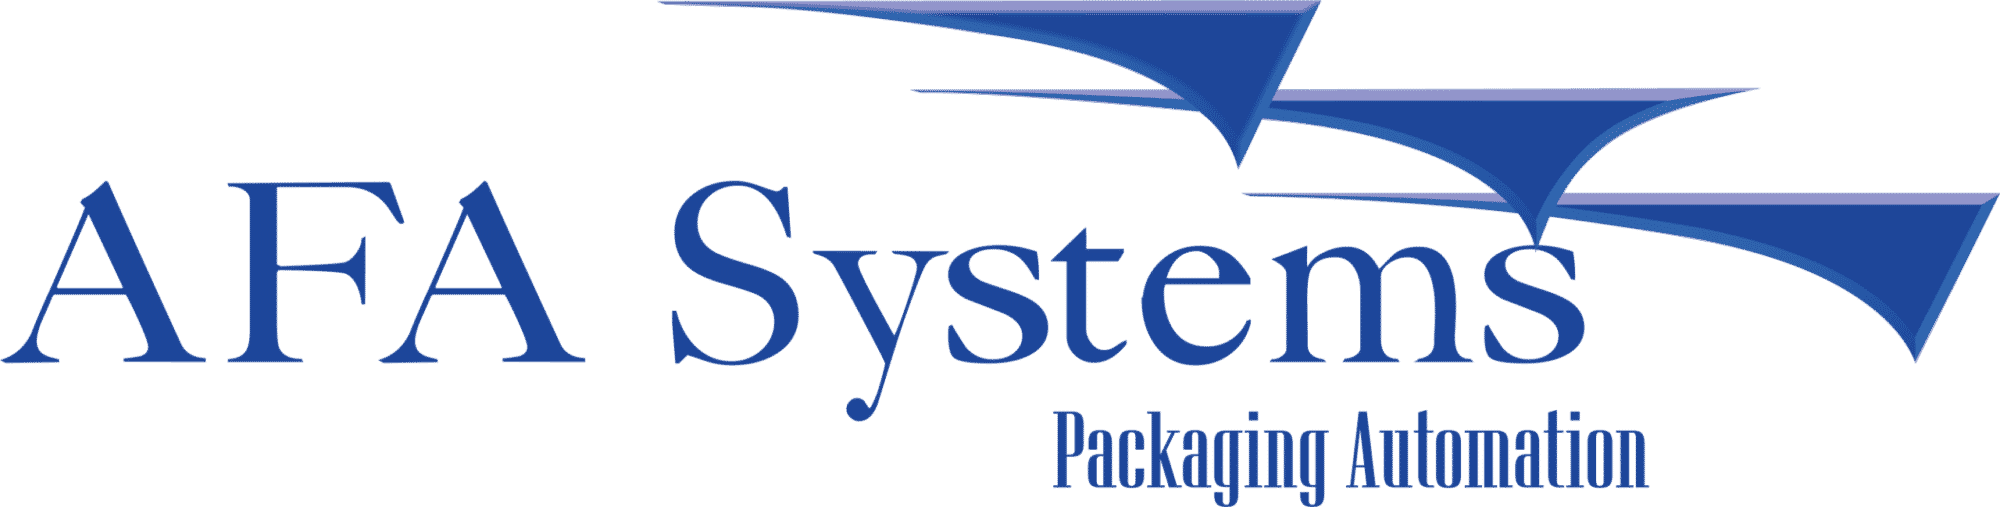 AFA Systems Packaging